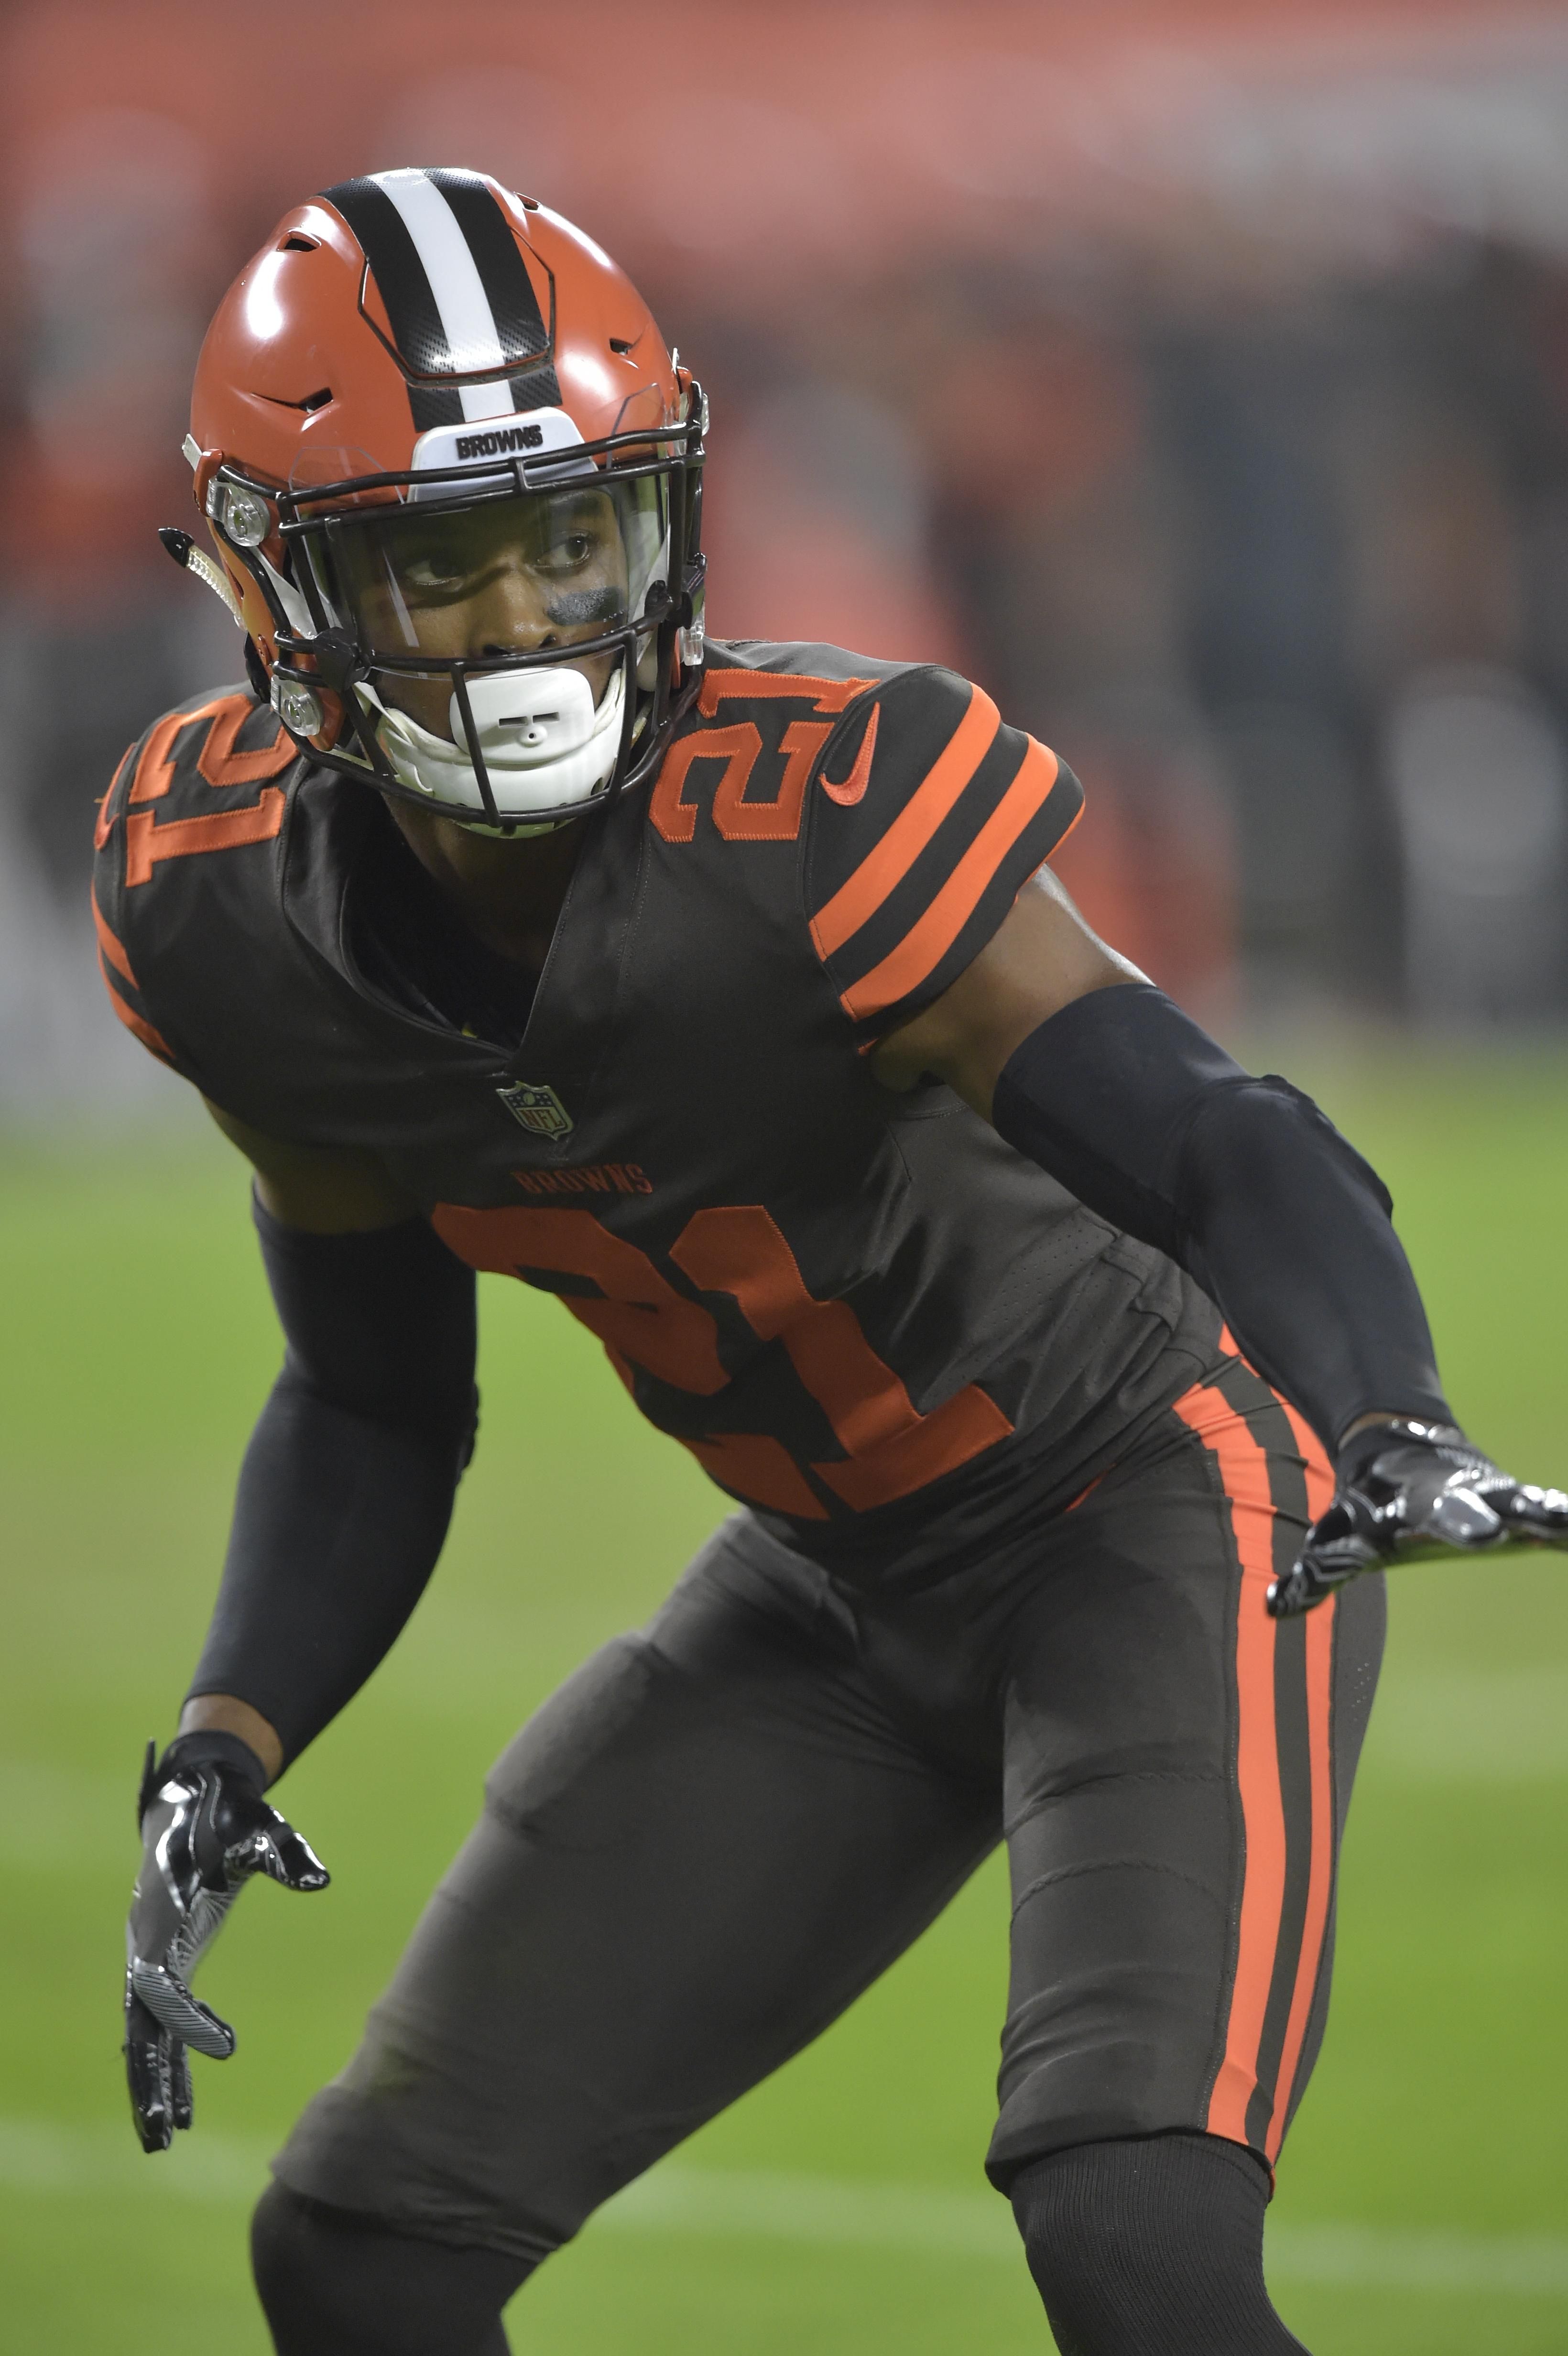 Rookie No Overall Pick Denzel Ward Upgrades His Progress As A